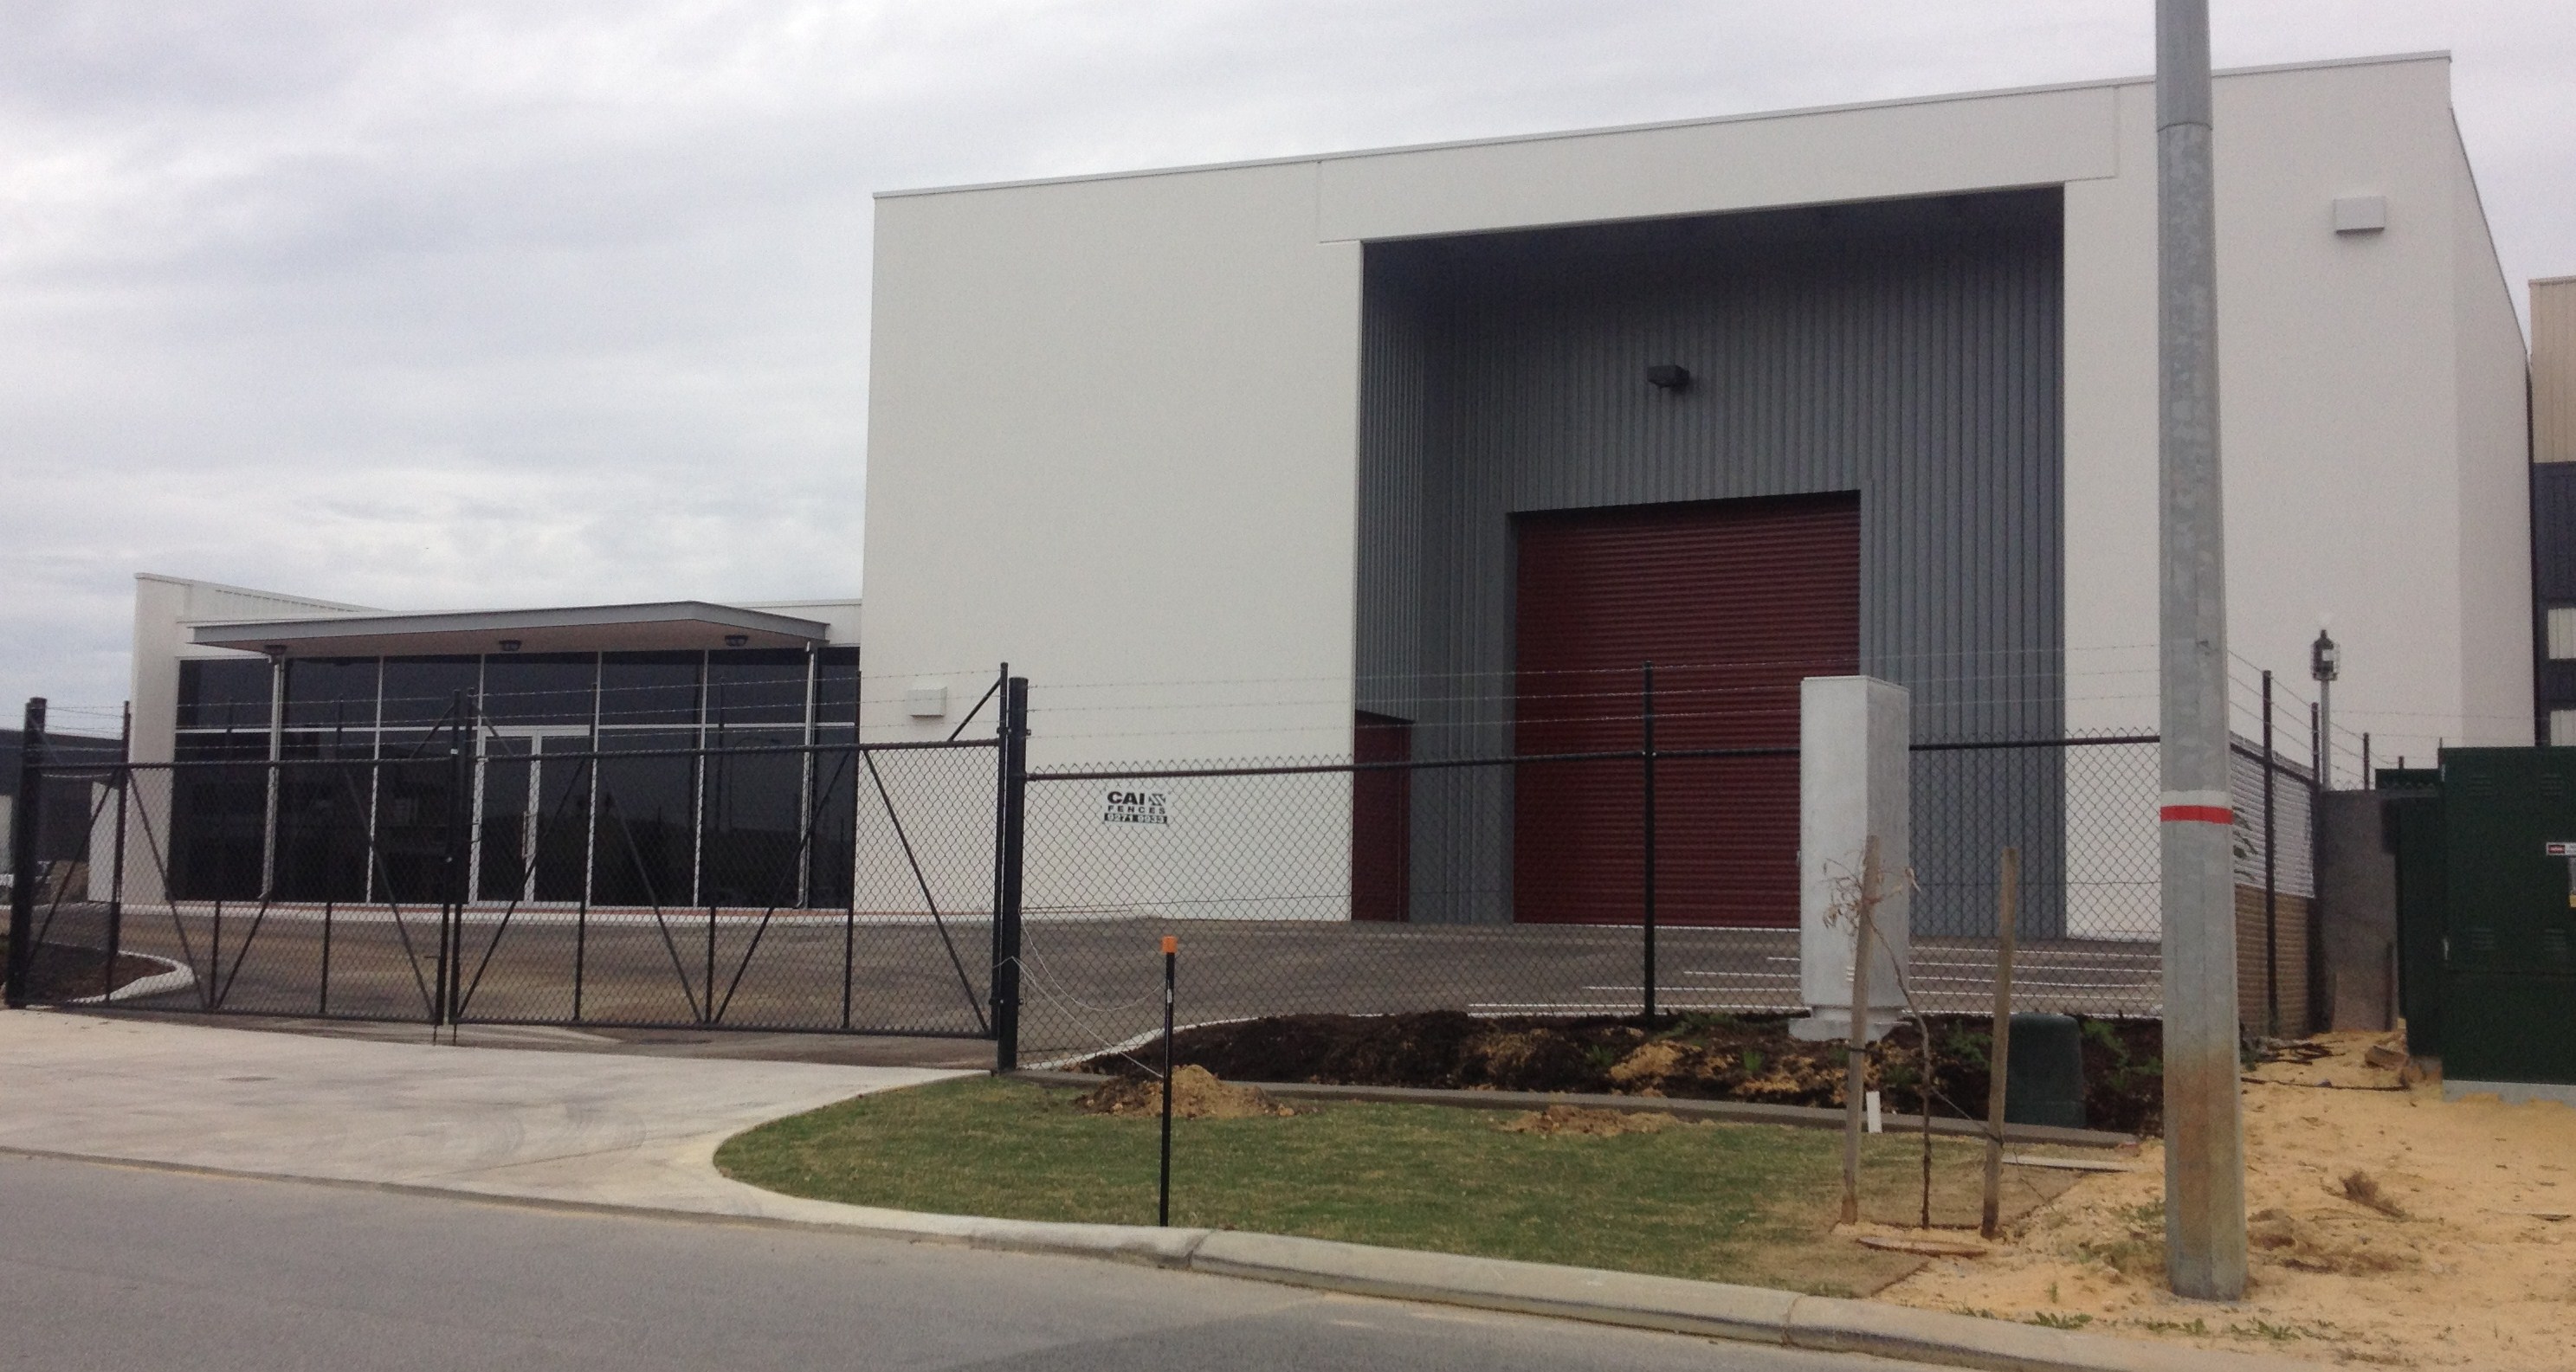 Exterior of large commercial garage and office, painted in grey and maroon and features a security fence